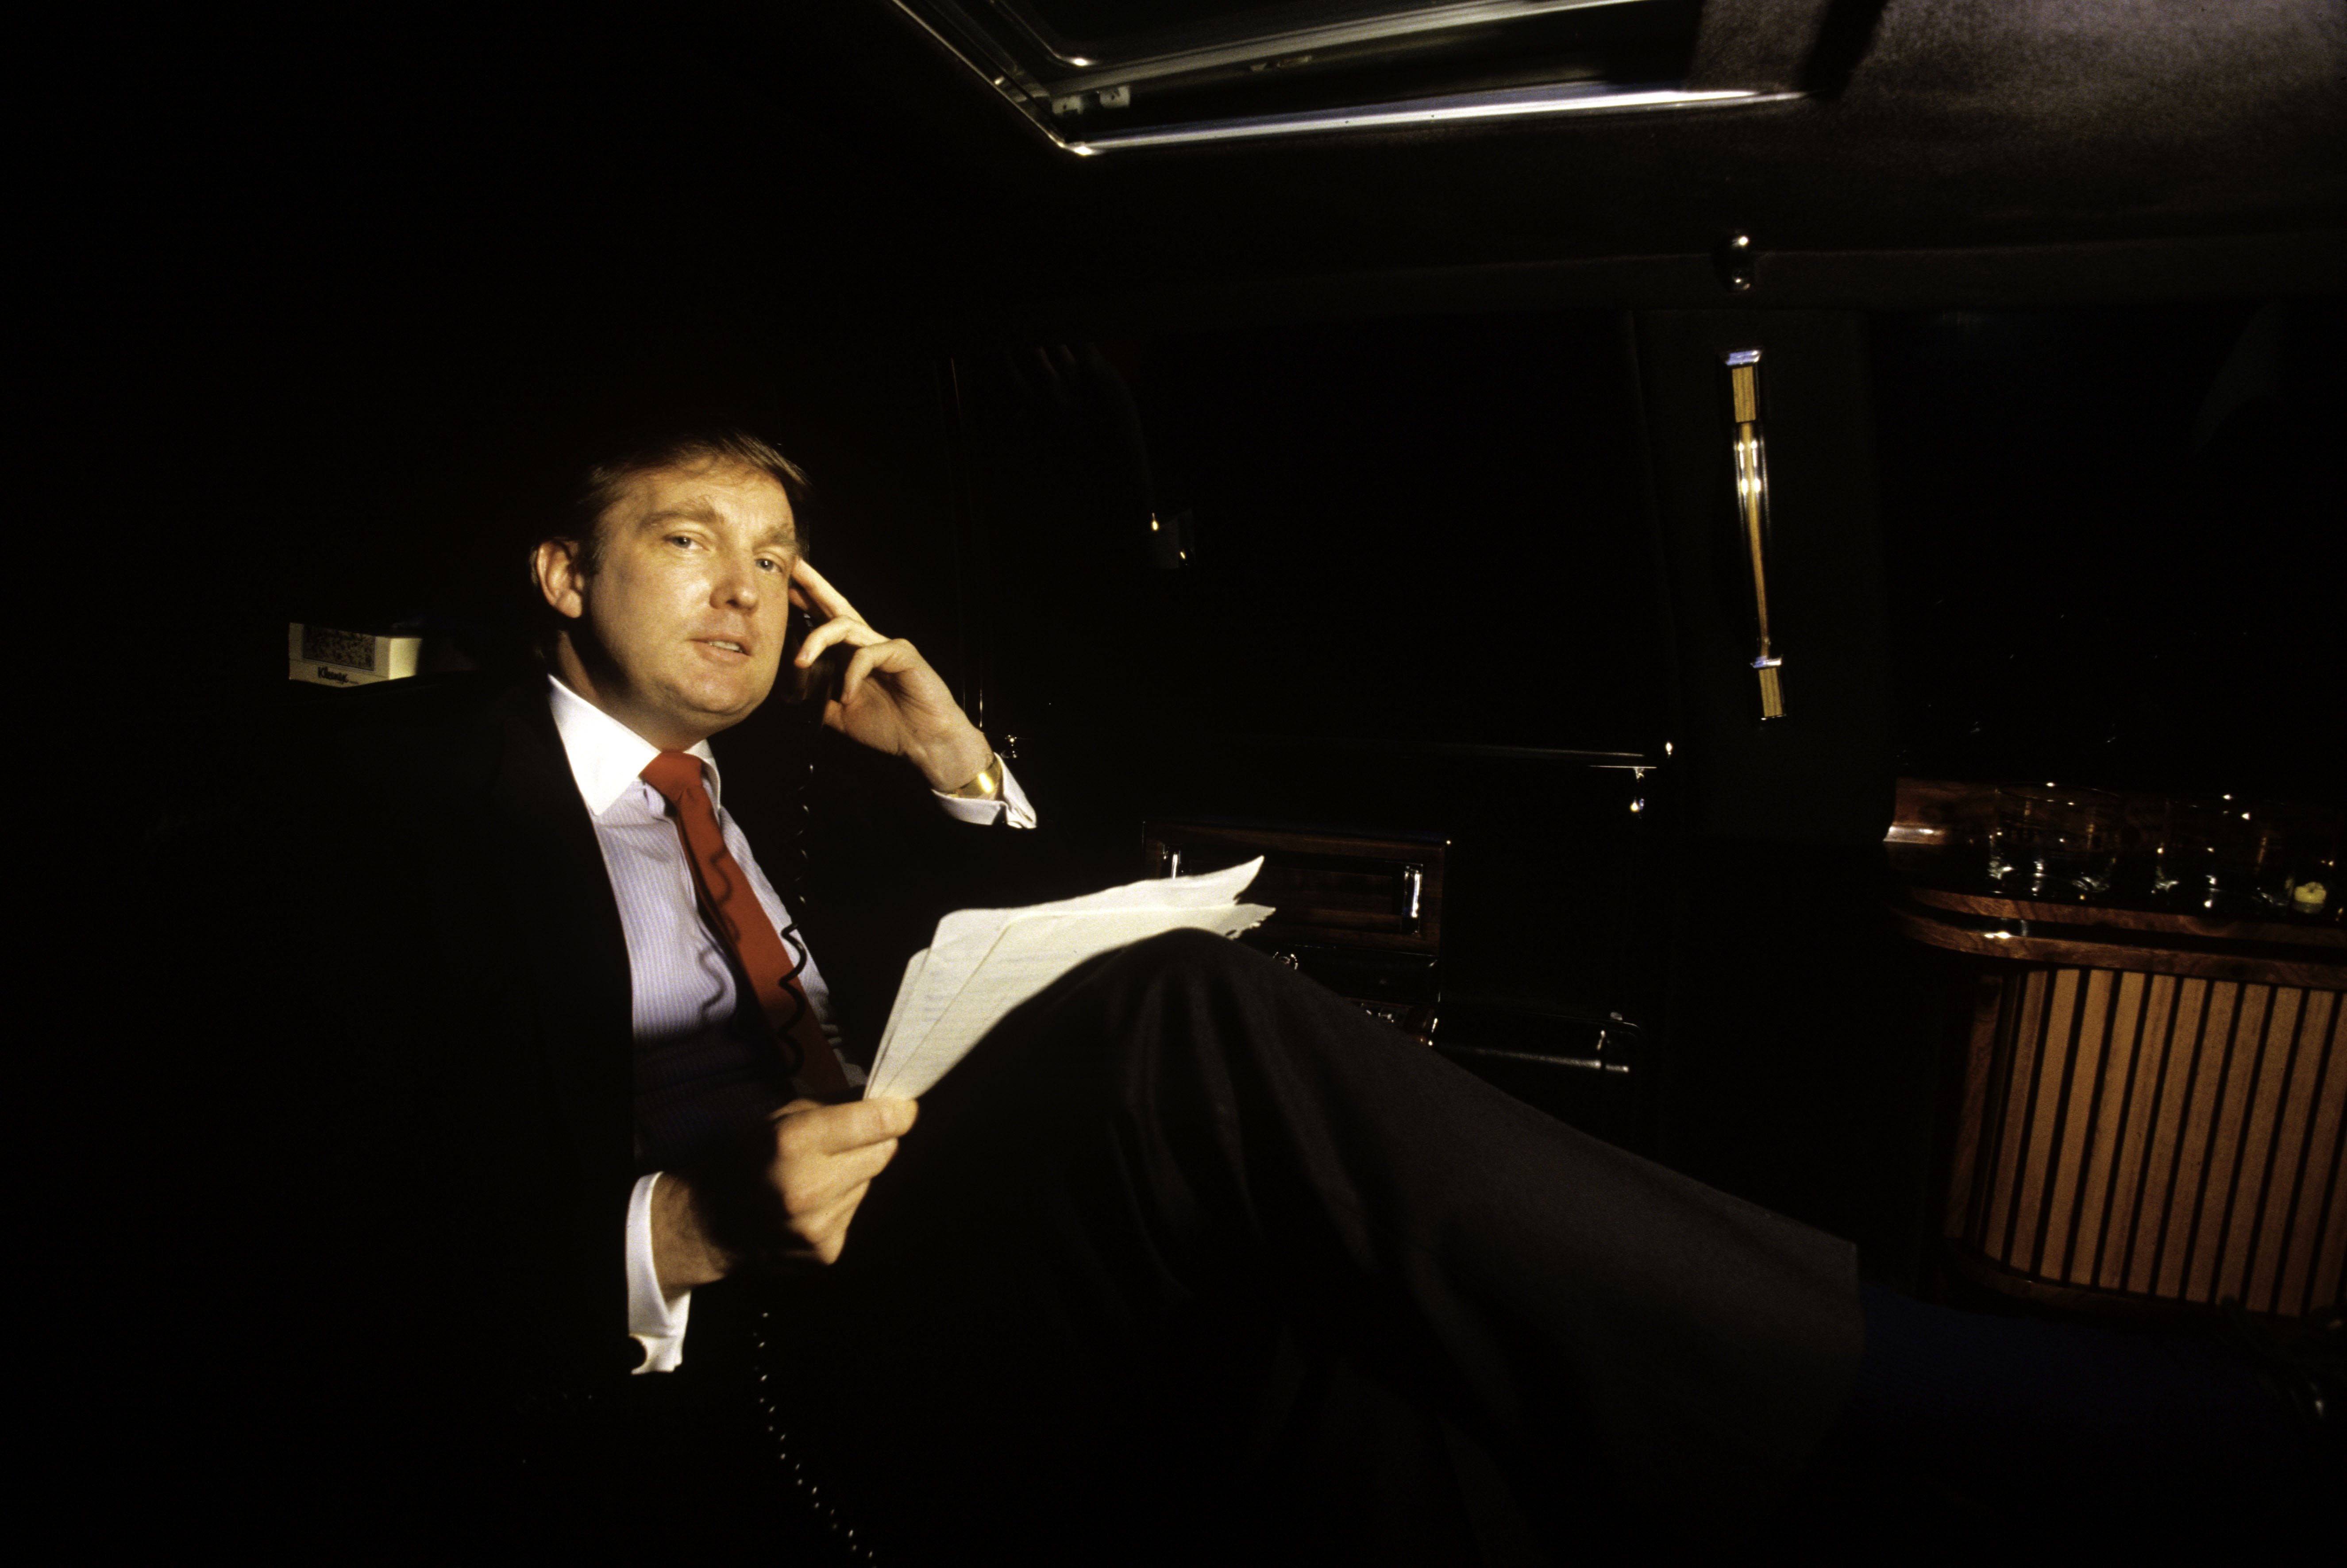 Donald Trump, real estate mogul, entrepreneur, and billionare commutes around New York City in his limousine often using this transportation as an office on August 1987 | Photo: GettyImages